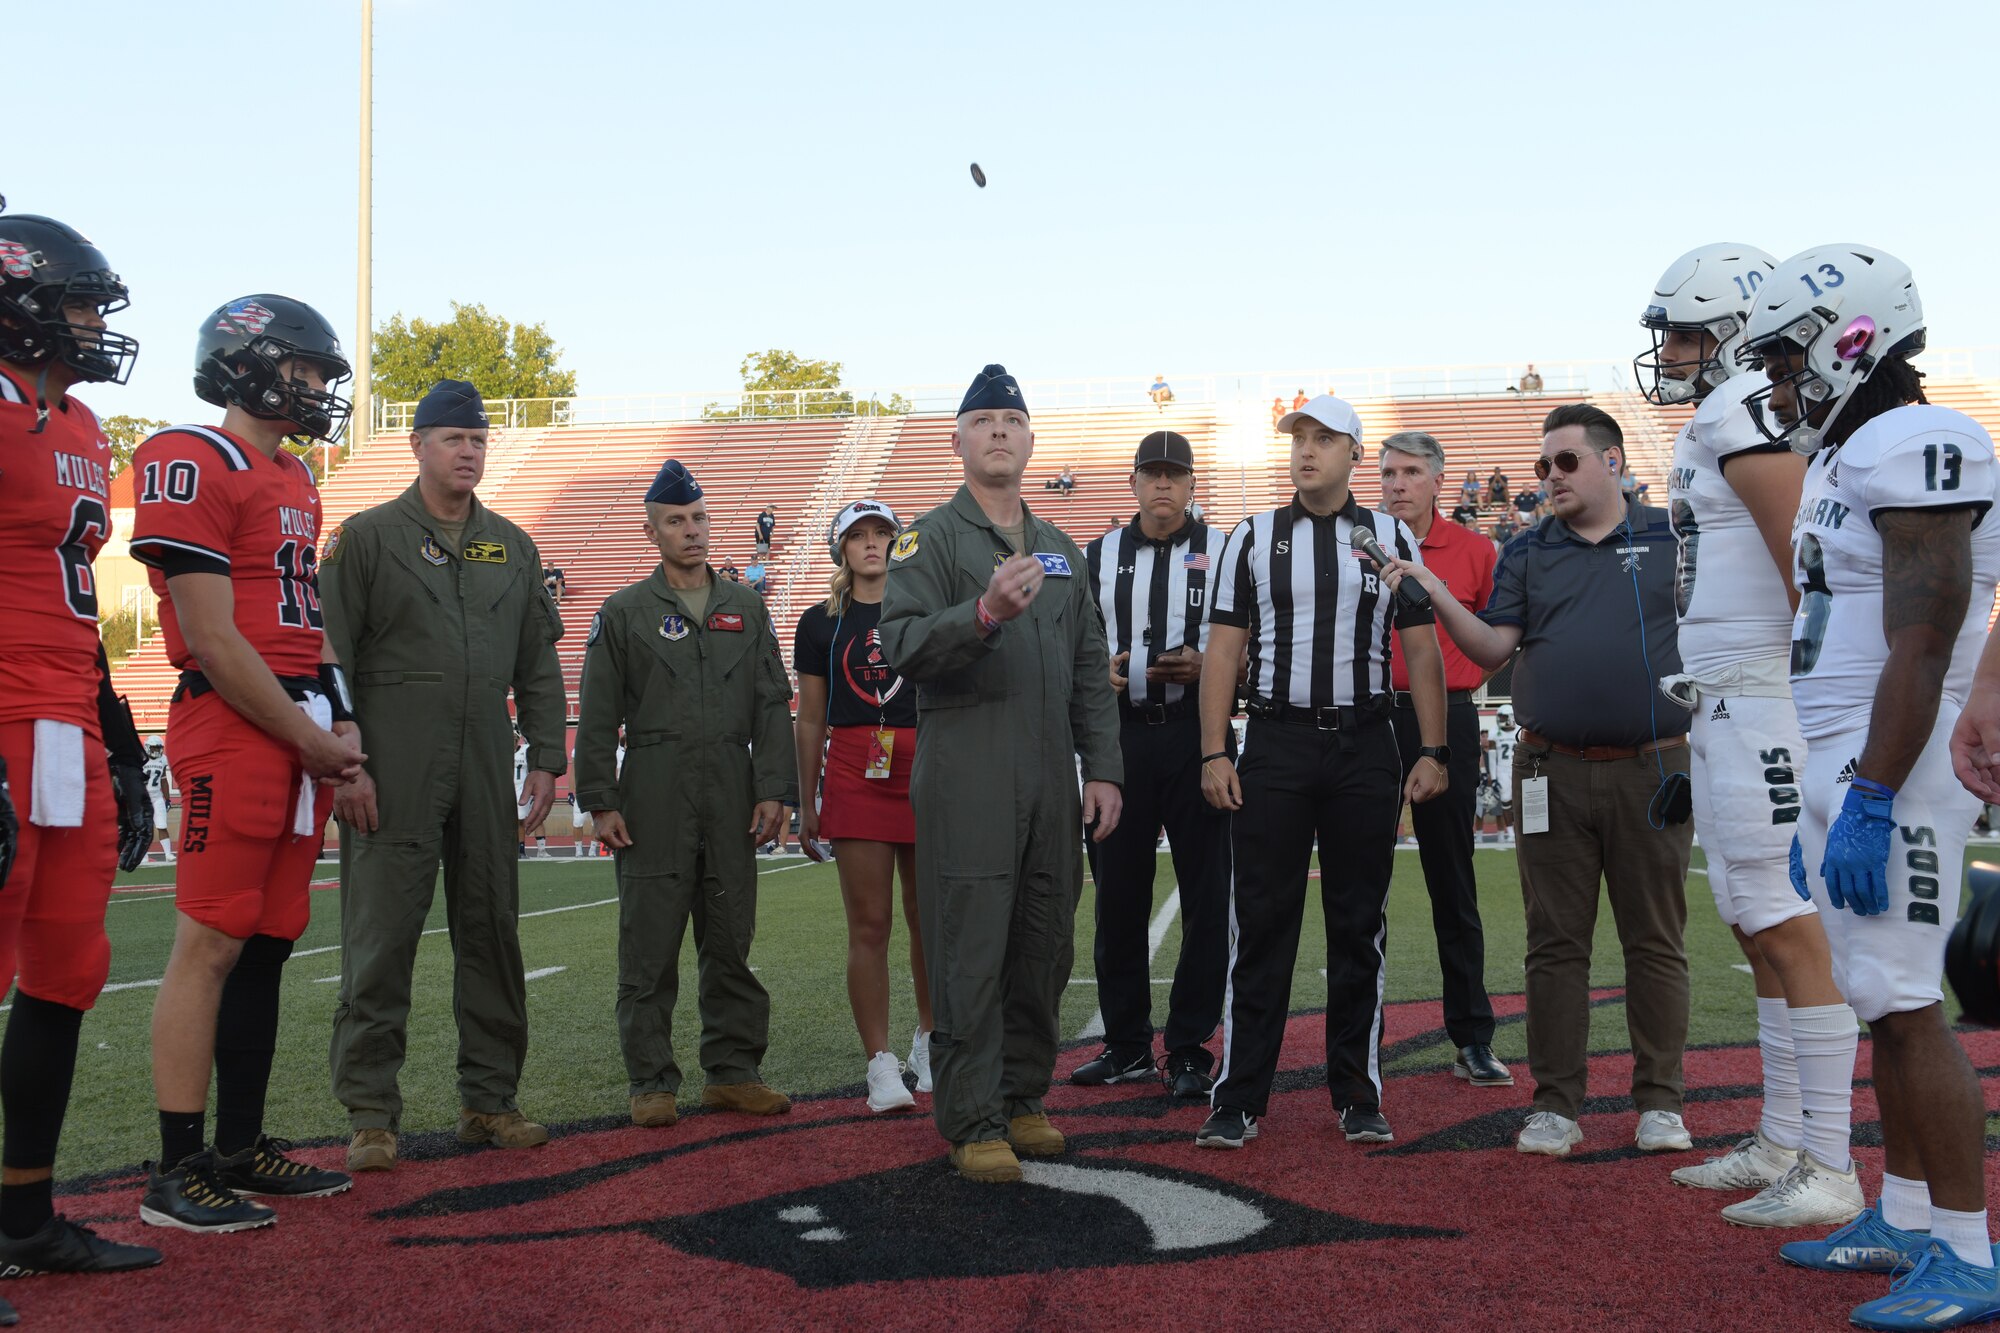 U.S. Air Force Col. Daniel Diehl, 509th Bomb Wing Commander, performs the coin toss prior to the University of Central Missouri Military Appreciation football game, Sept. 8, 2022, in Warrensburg, Missouri. Whiteman AFB and UCM share a valuable community partnership that fosters a supportive relationship between the base and local communities. (U.S. Air Force photo by Tech. Sgt. Dylan Nuckolls)